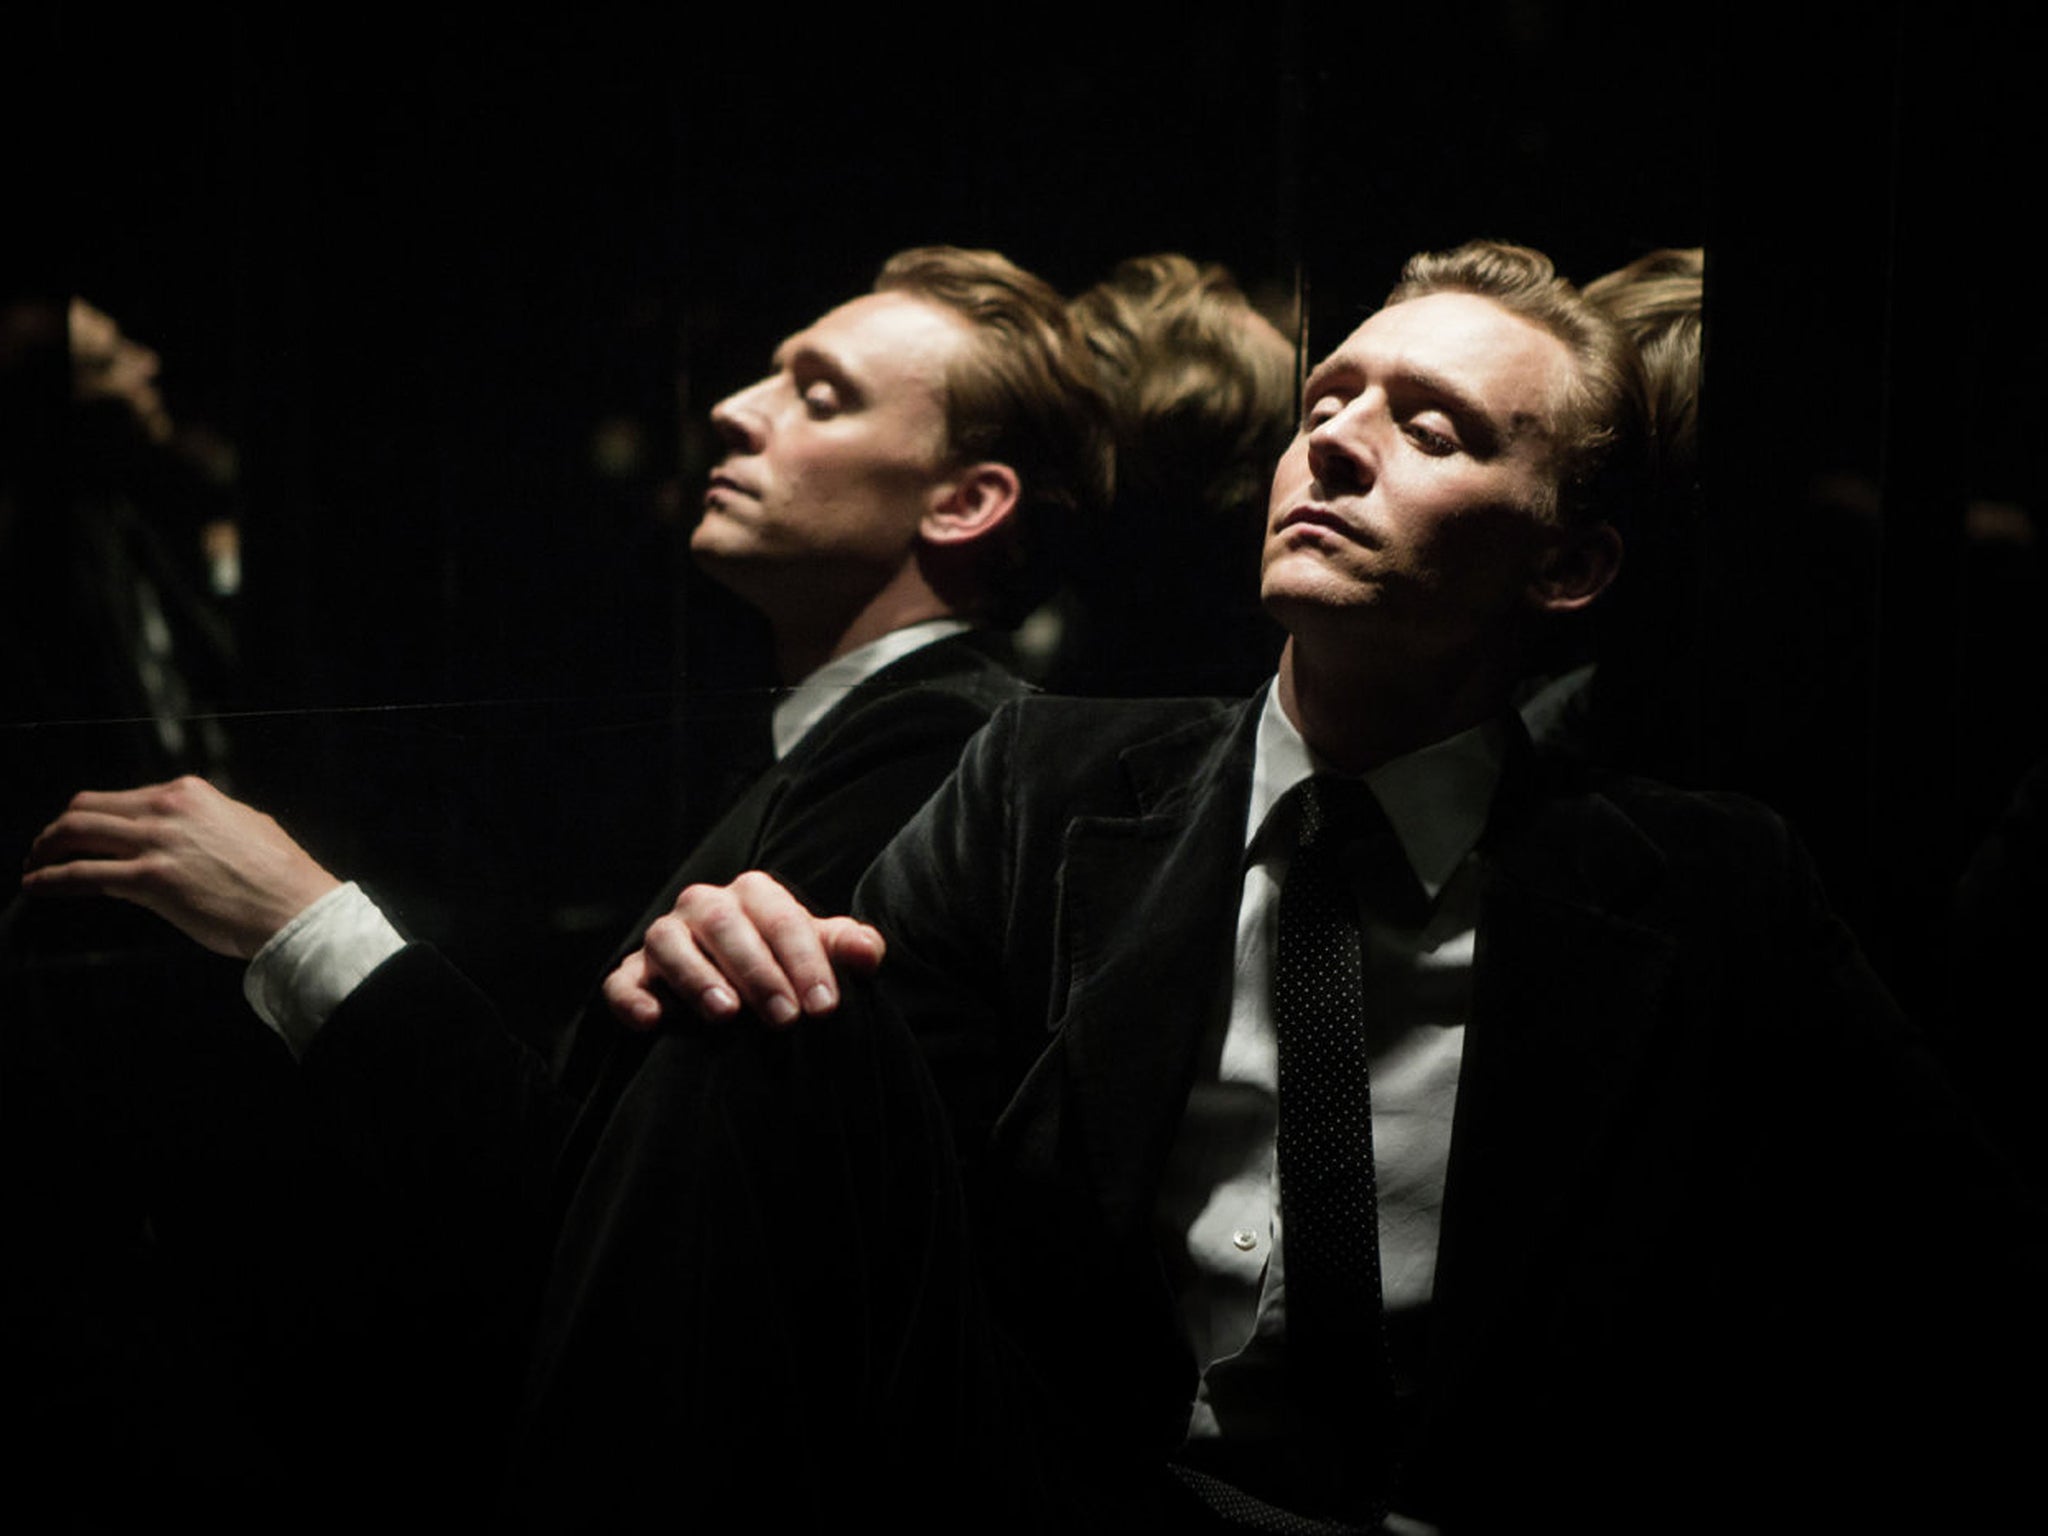 Tom Hiddleston in the film of 'High Rise'